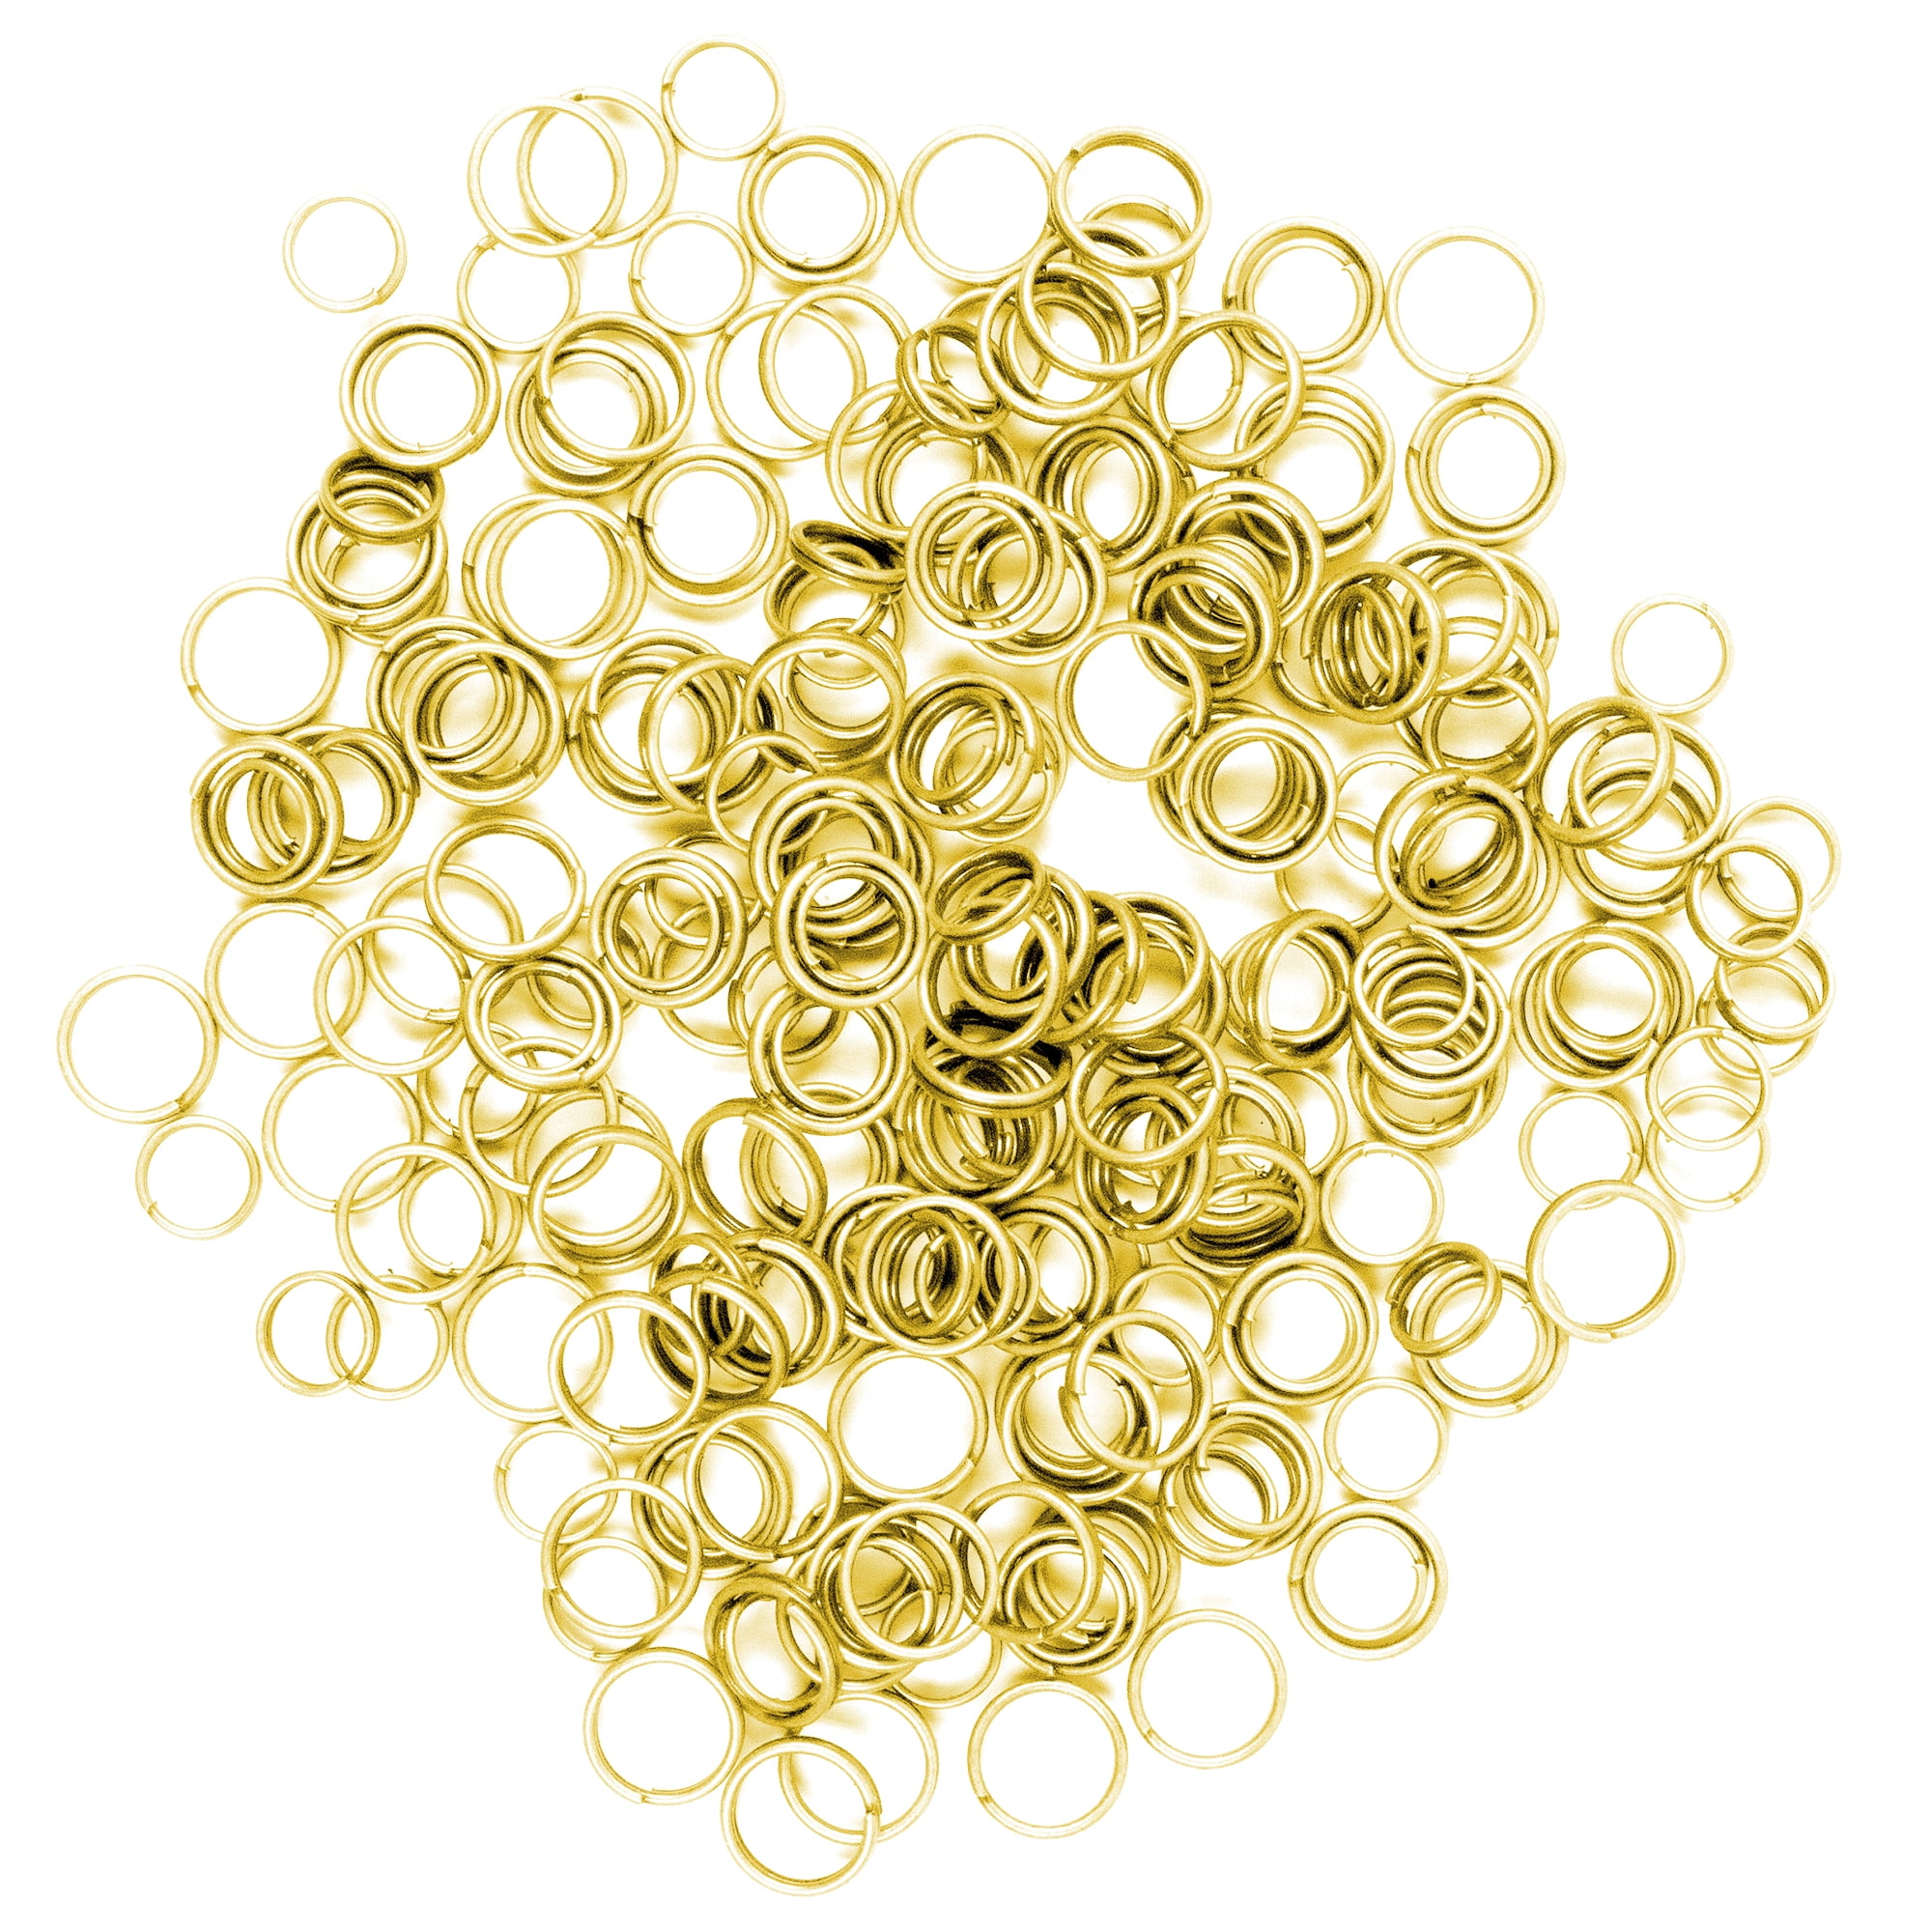 400pcs jump rings for jewelry making DIY | Explore, Celebrate, and Share  the Bond of Love